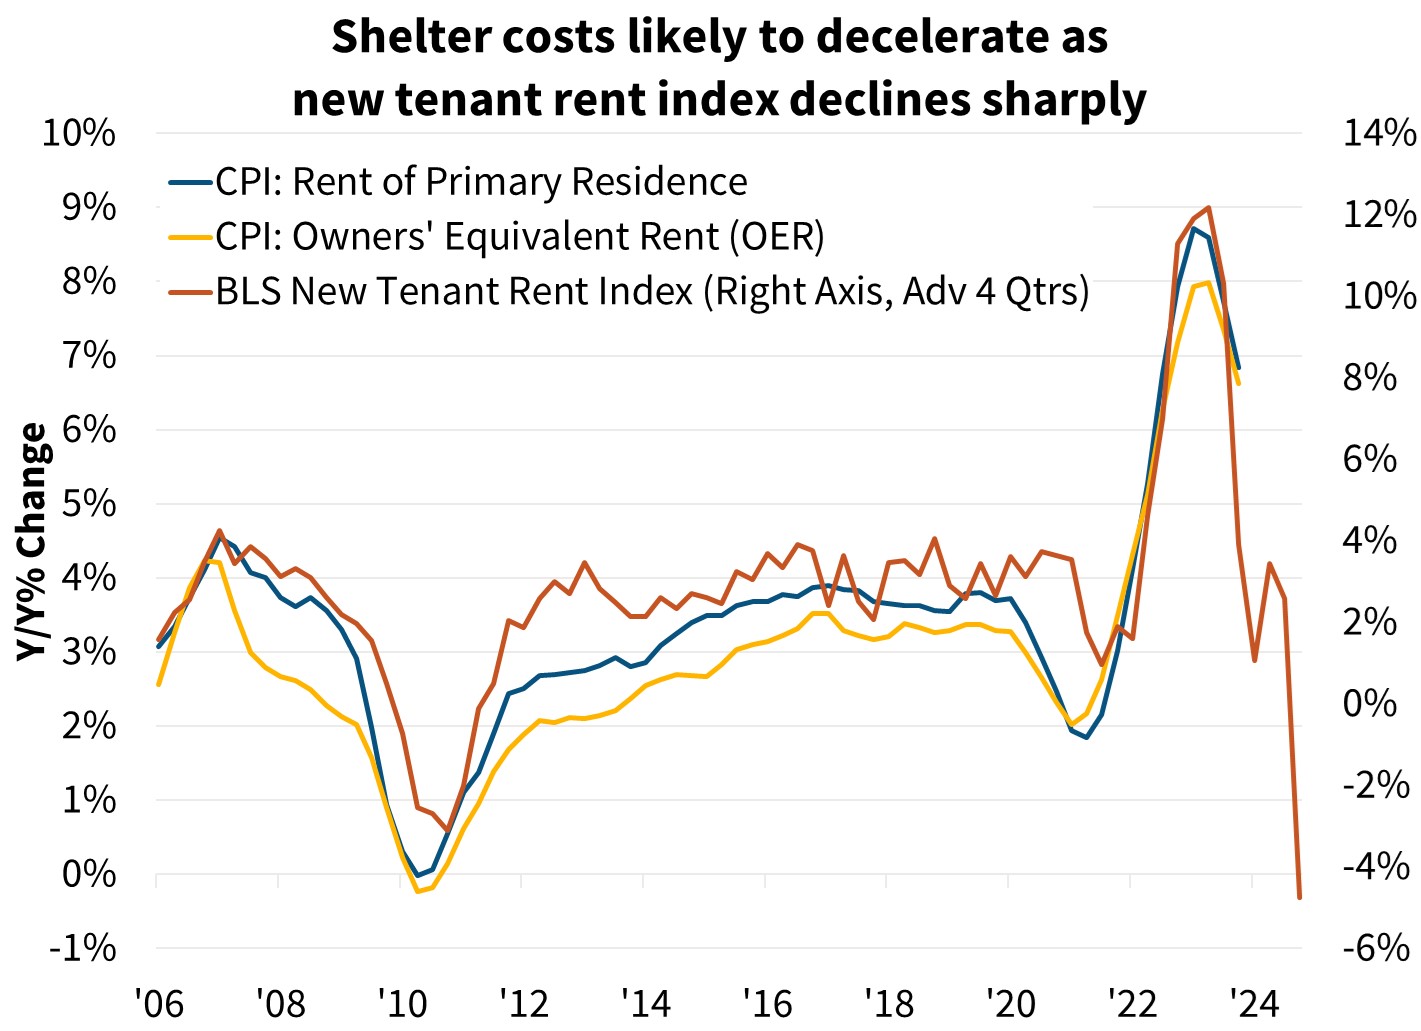 Shelter costs likely to decelerate as new tenant rent index declines sharply